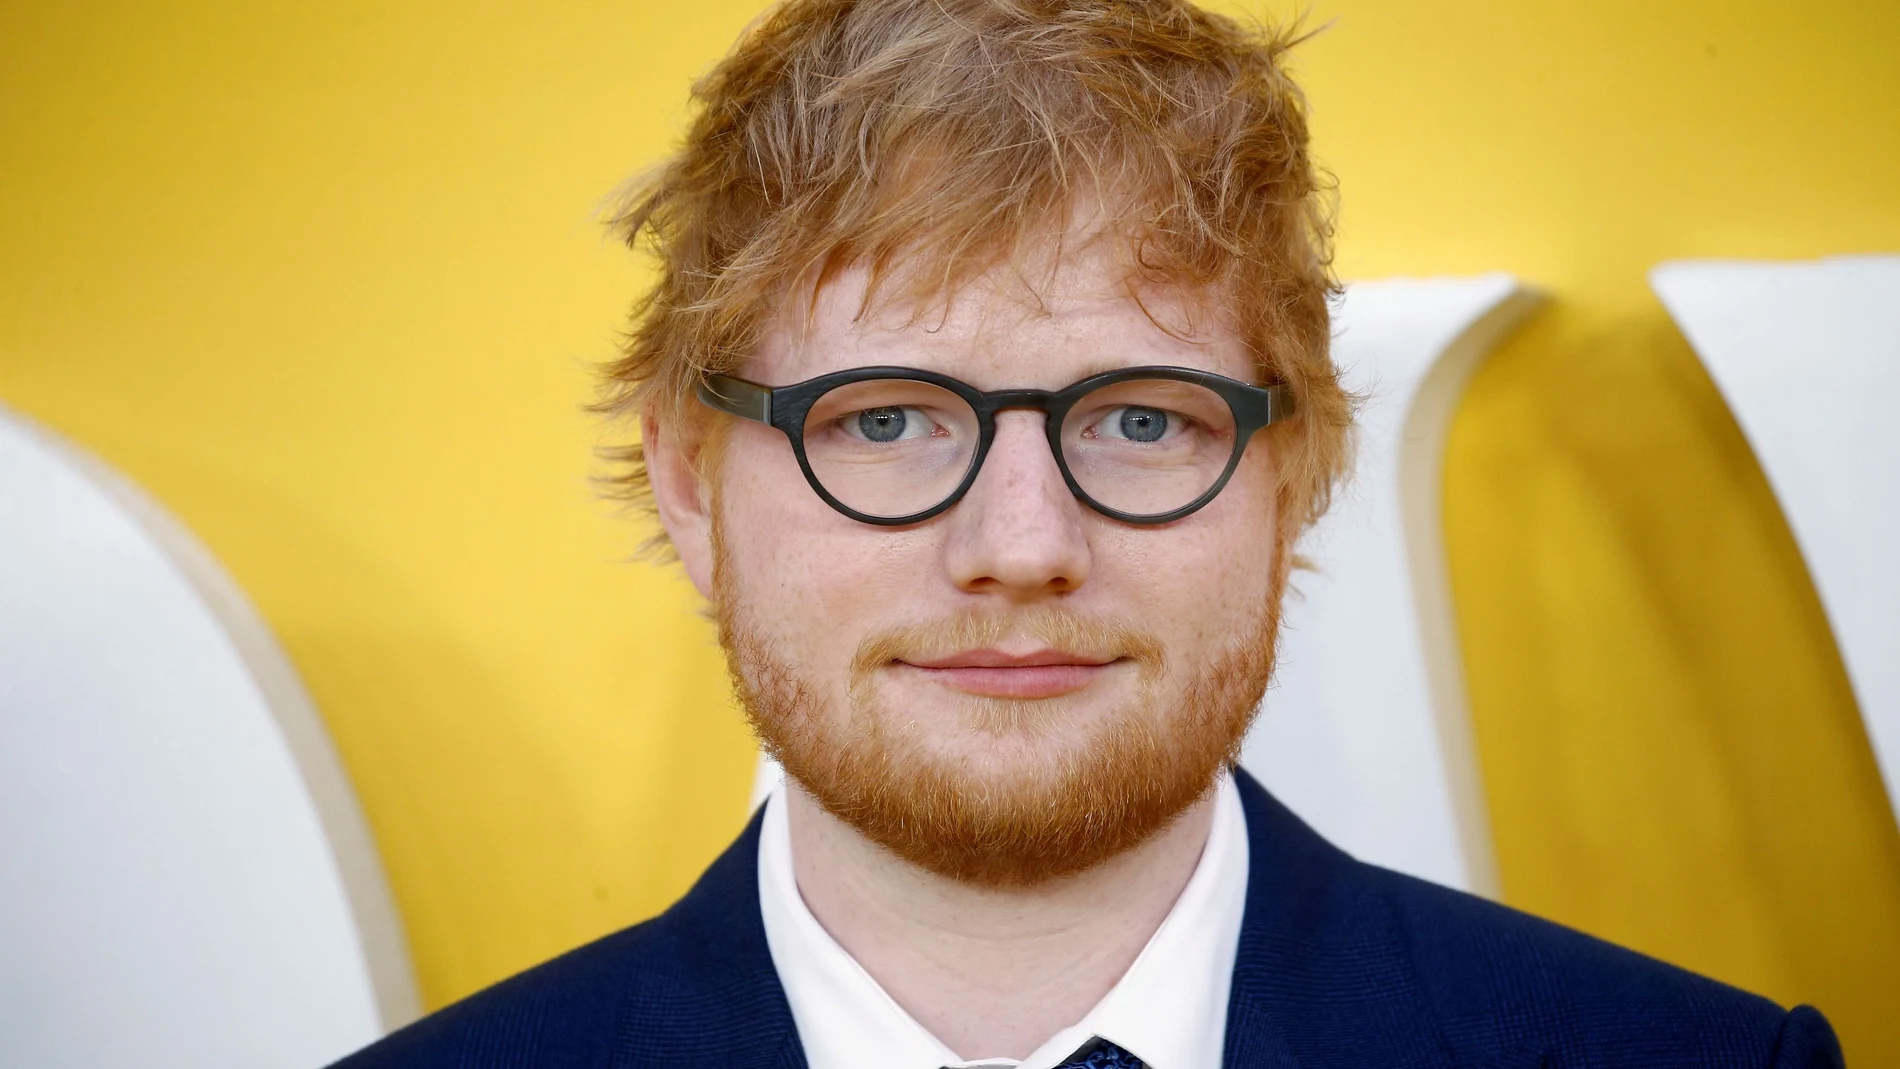 FILE PHOTO: Cast member Ed Sheeran attends the UK premiere of "Yesterday" in London, Britain, June 18, 2019. REUTERS/Henry Nicholls/File Photo